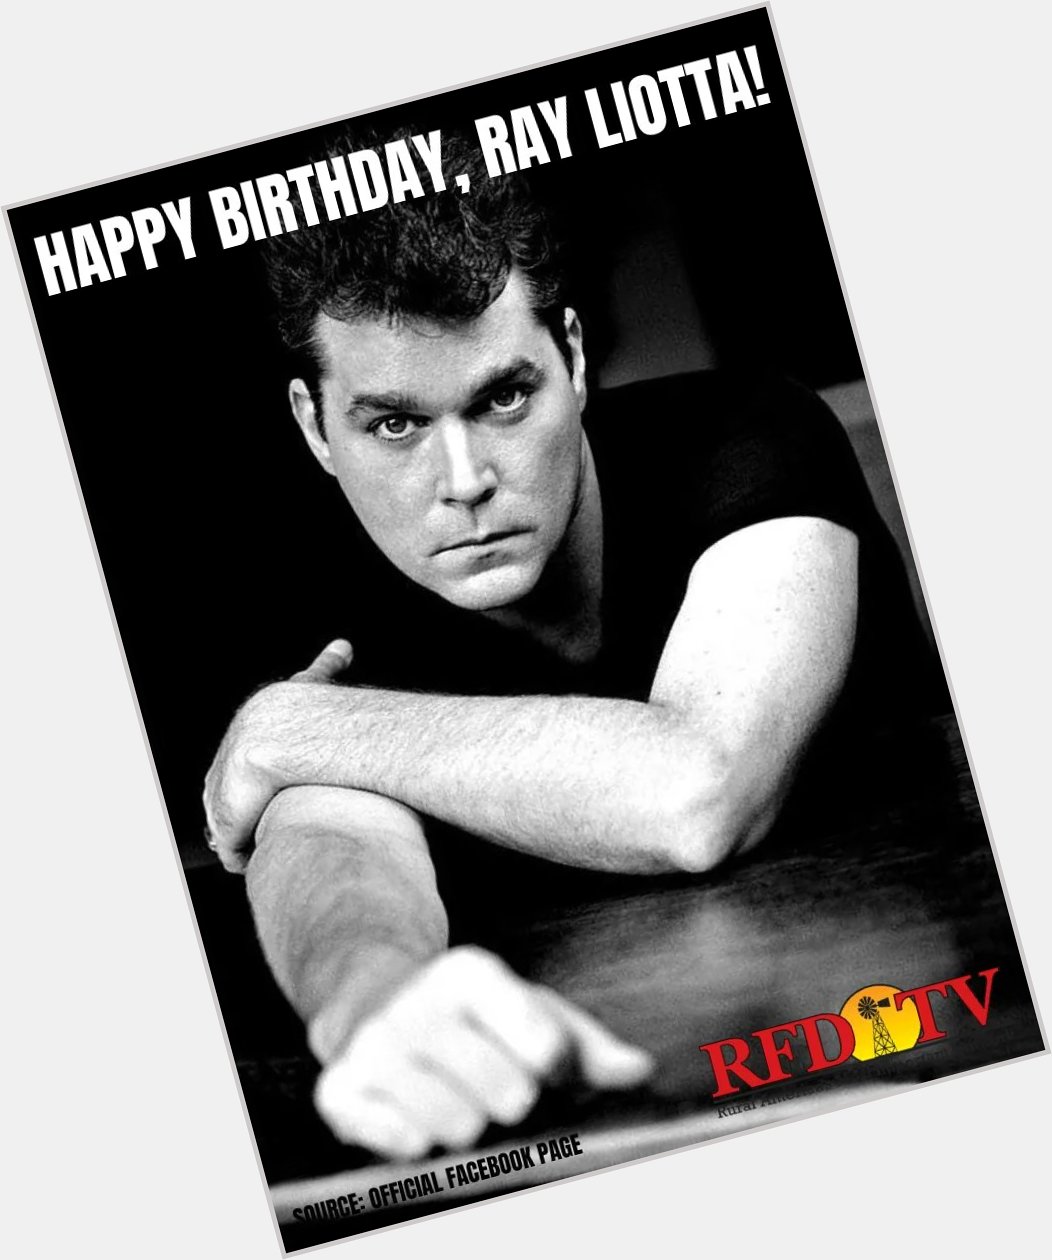 Happy Birthday to the late Ray Liotta!  